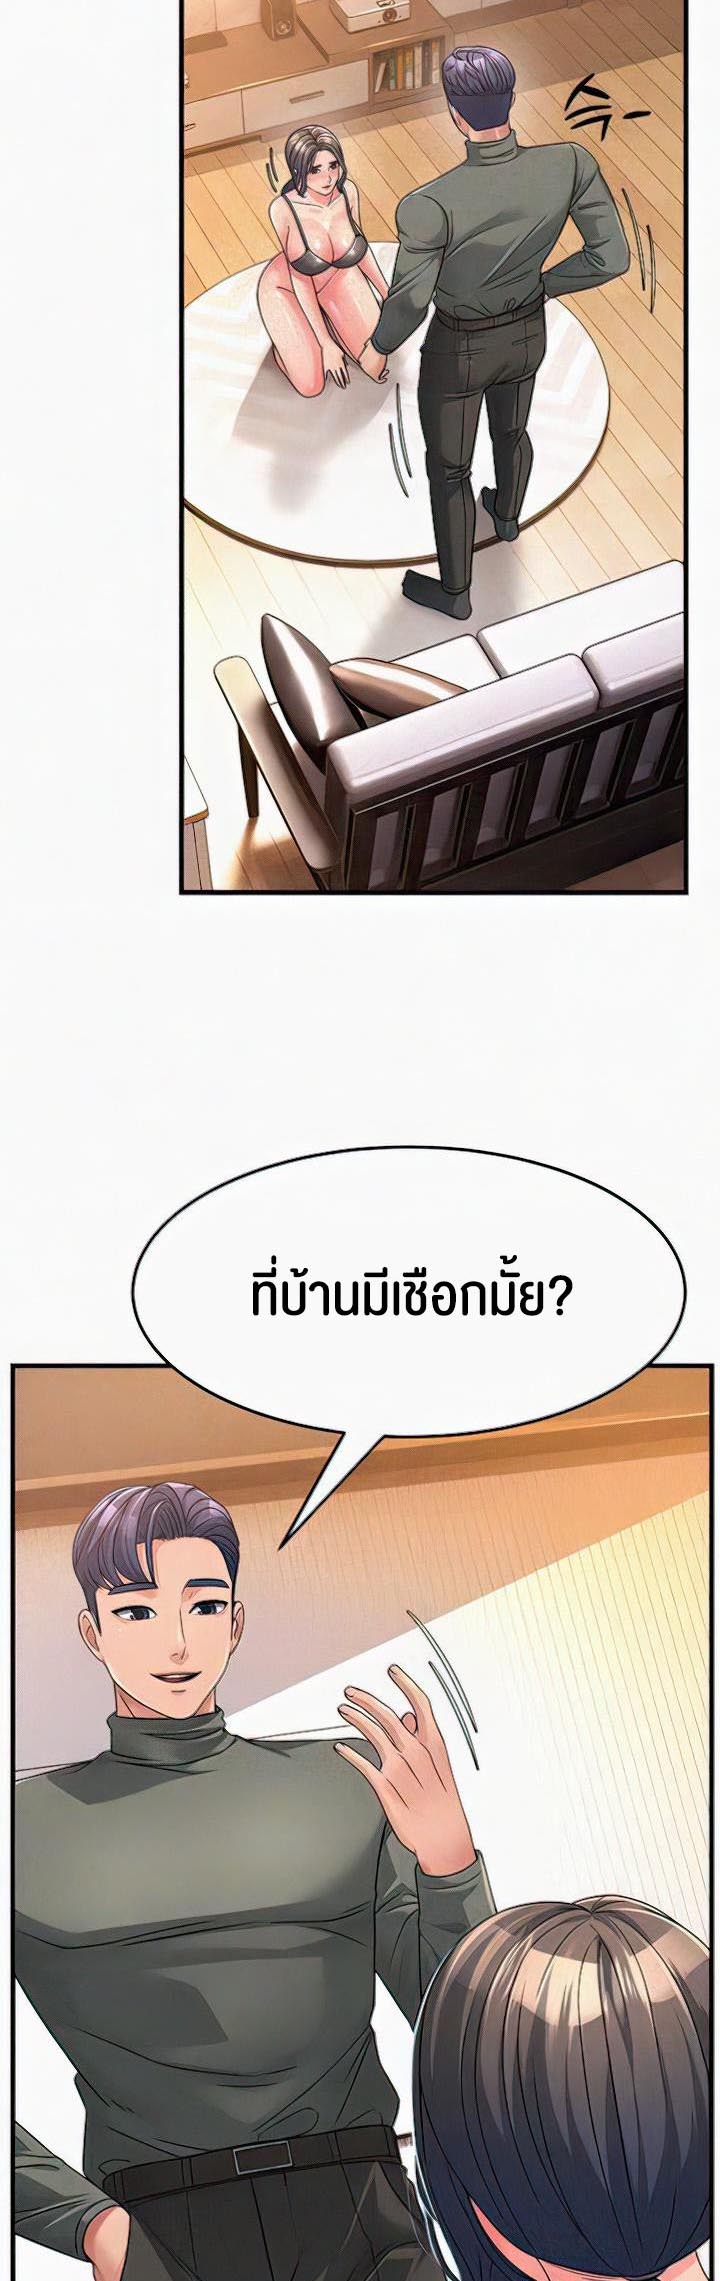 à¸­à¹ˆà¸²à¸™à¹‚à¸”à¸ˆà¸´à¸™ à¹€à¸£à¸·à¹ˆà¸­à¸‡ Mother in Law Bends To My Will 6 11